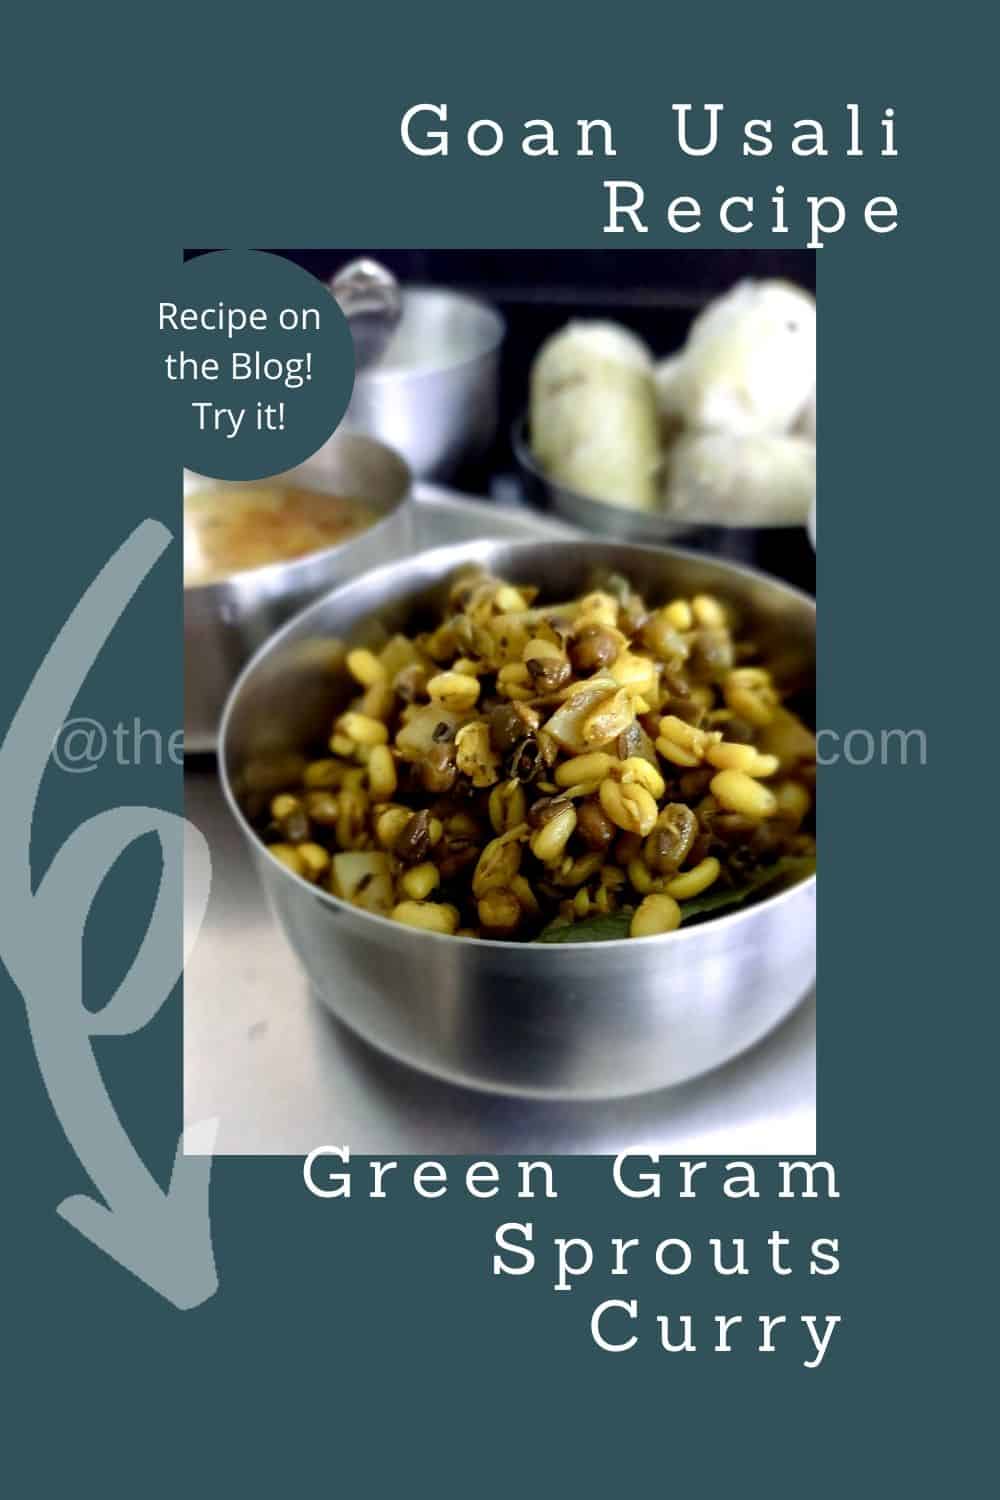 A serving of Green Gram Sprouts cooked into a curry with no onion and no garlic